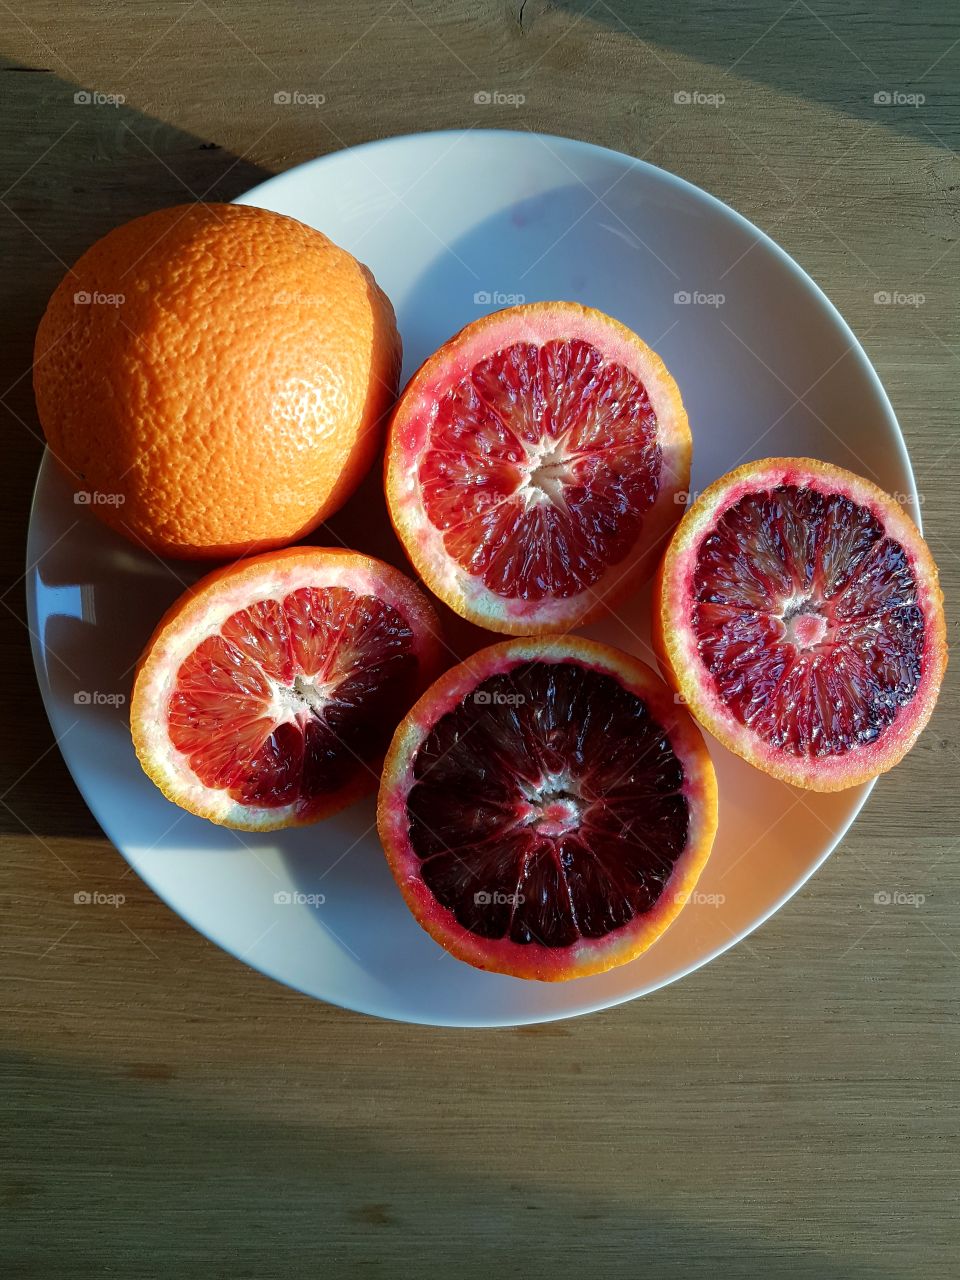 Blood oranges cut in half in a withe dish